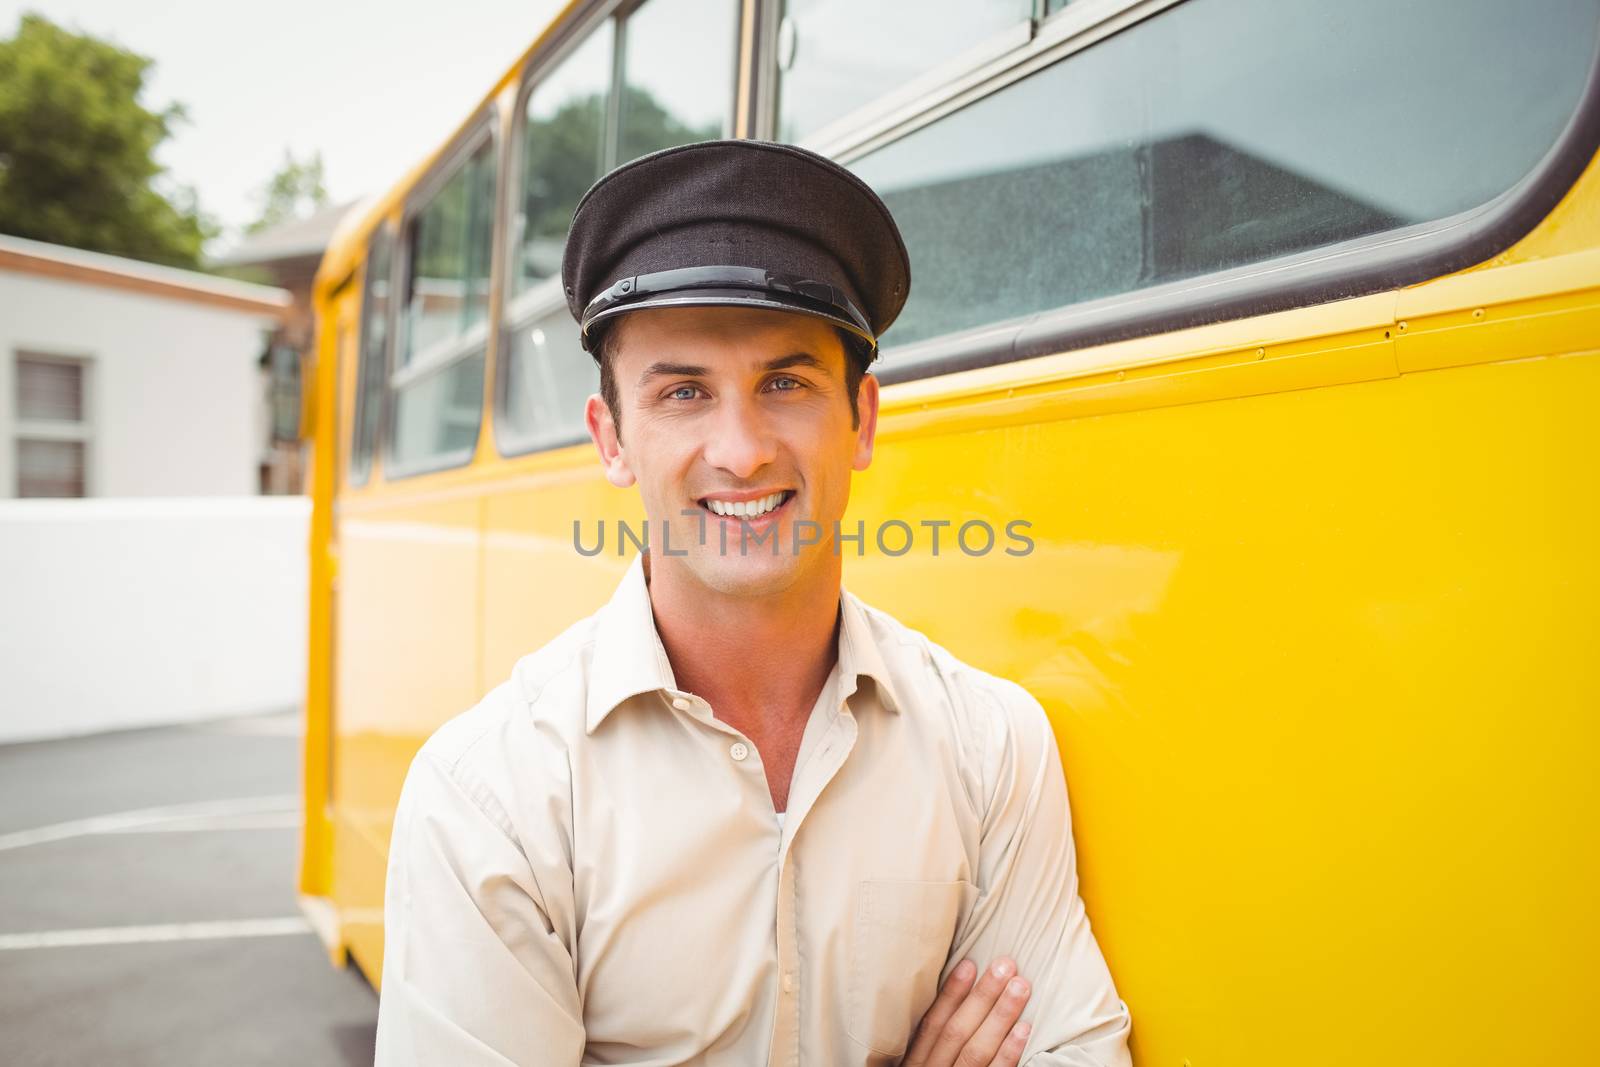 Smiling bus driver looking at camera outside the elementary school